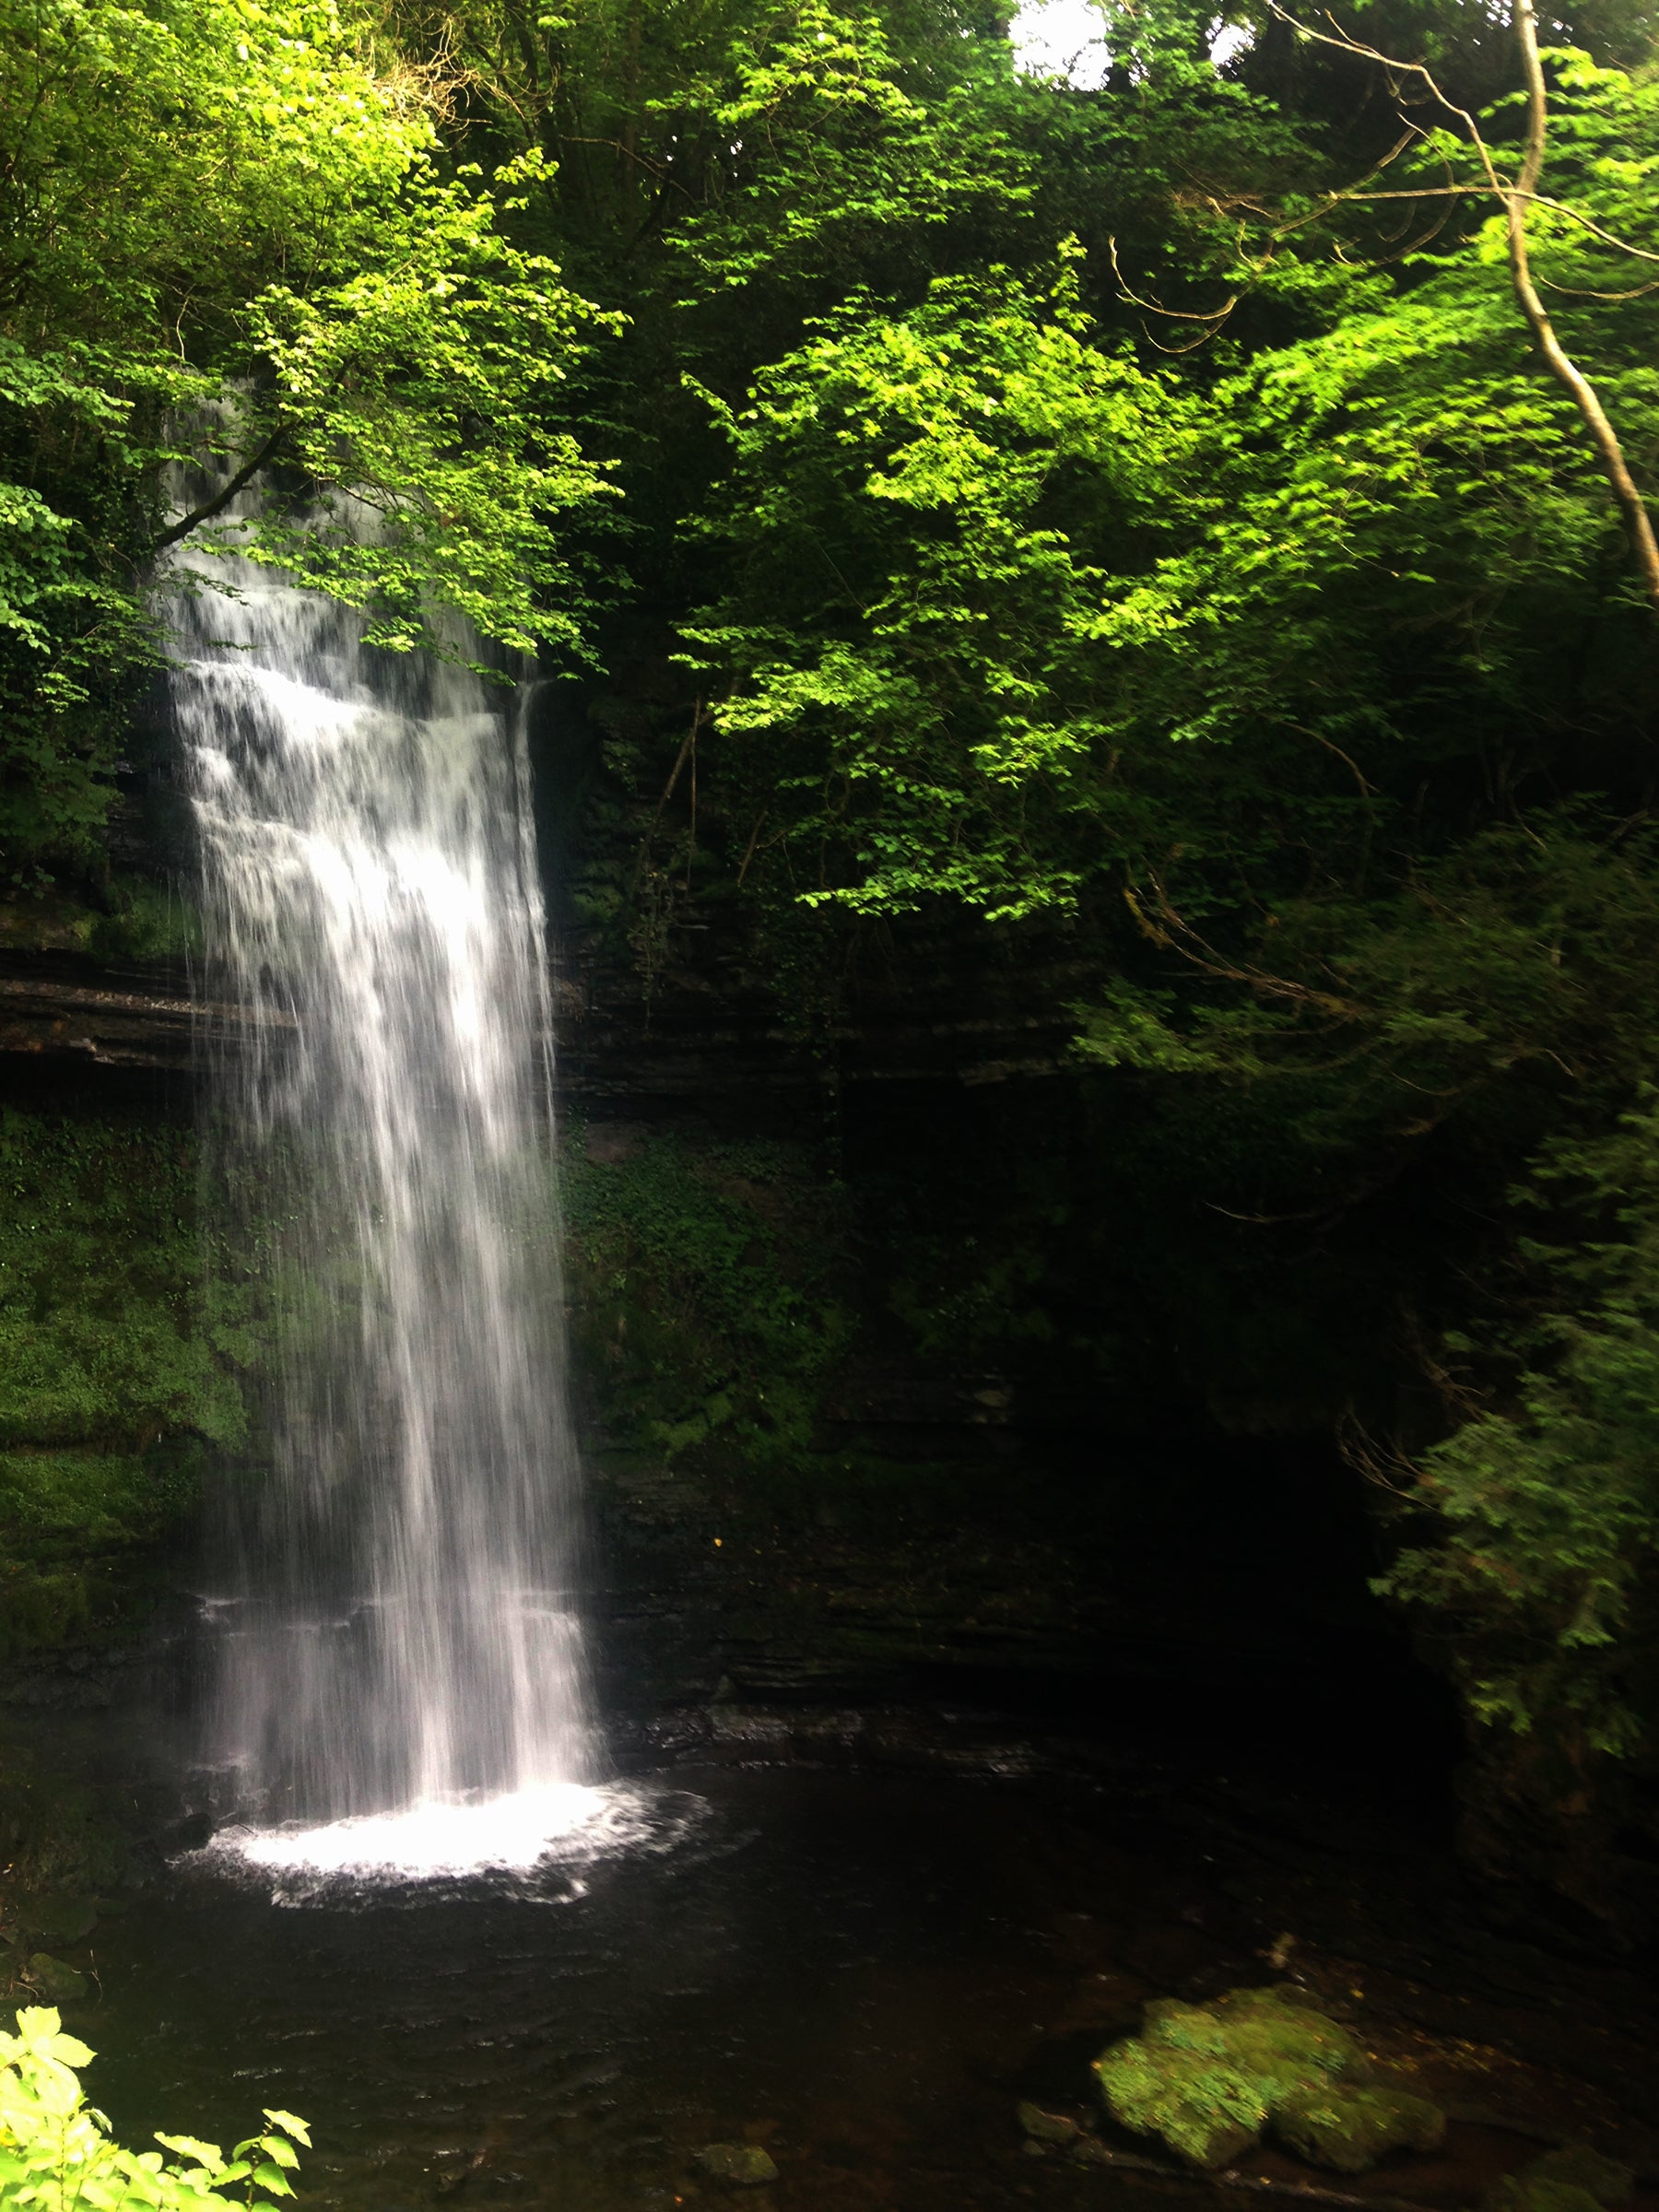 The Glencar Waterfall drops ‘in pools among the rushes’ in WB Yeats’ poem ‘The Stolen Child’